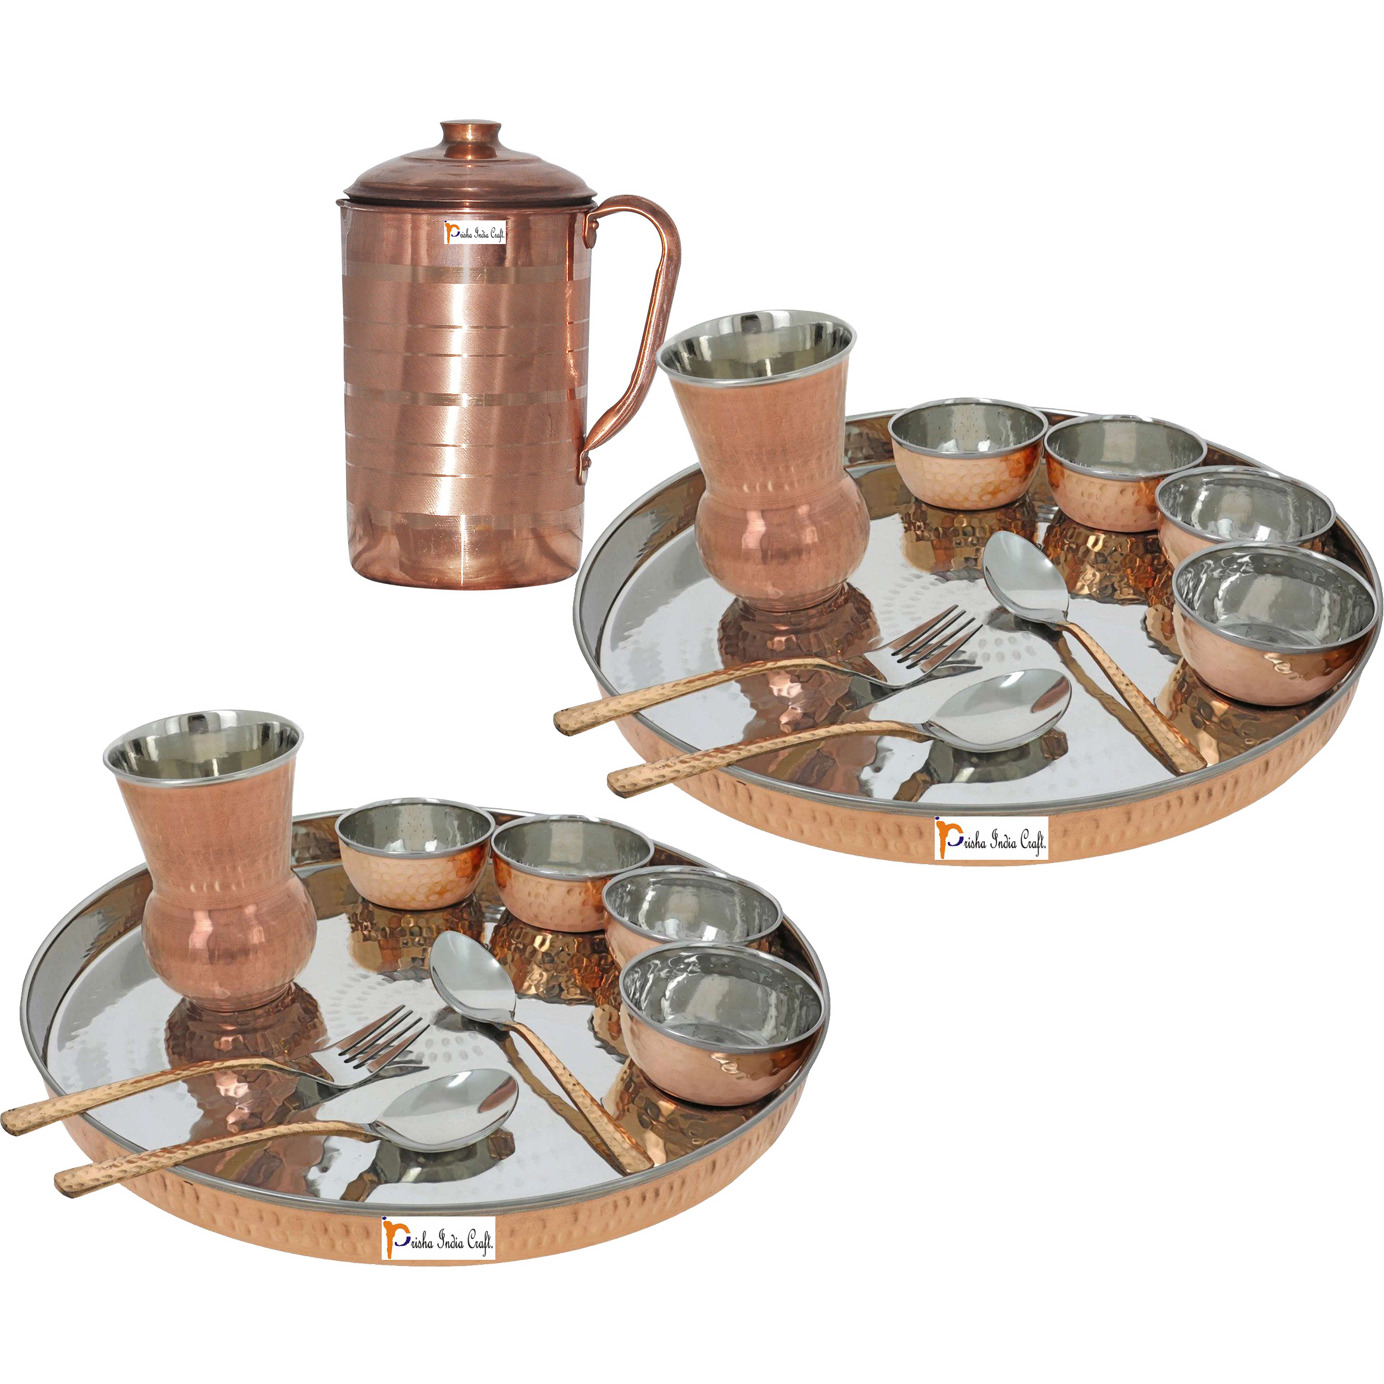 Prisha India Craft B. Set of 2 Dinnerware Traditional Stainless Steel Copper Dinner Set of Thali Plate, Bowls, Glass and Spoons, Dia 13  With 1 Pure Copper Pitcher Jug - Christmas Gift